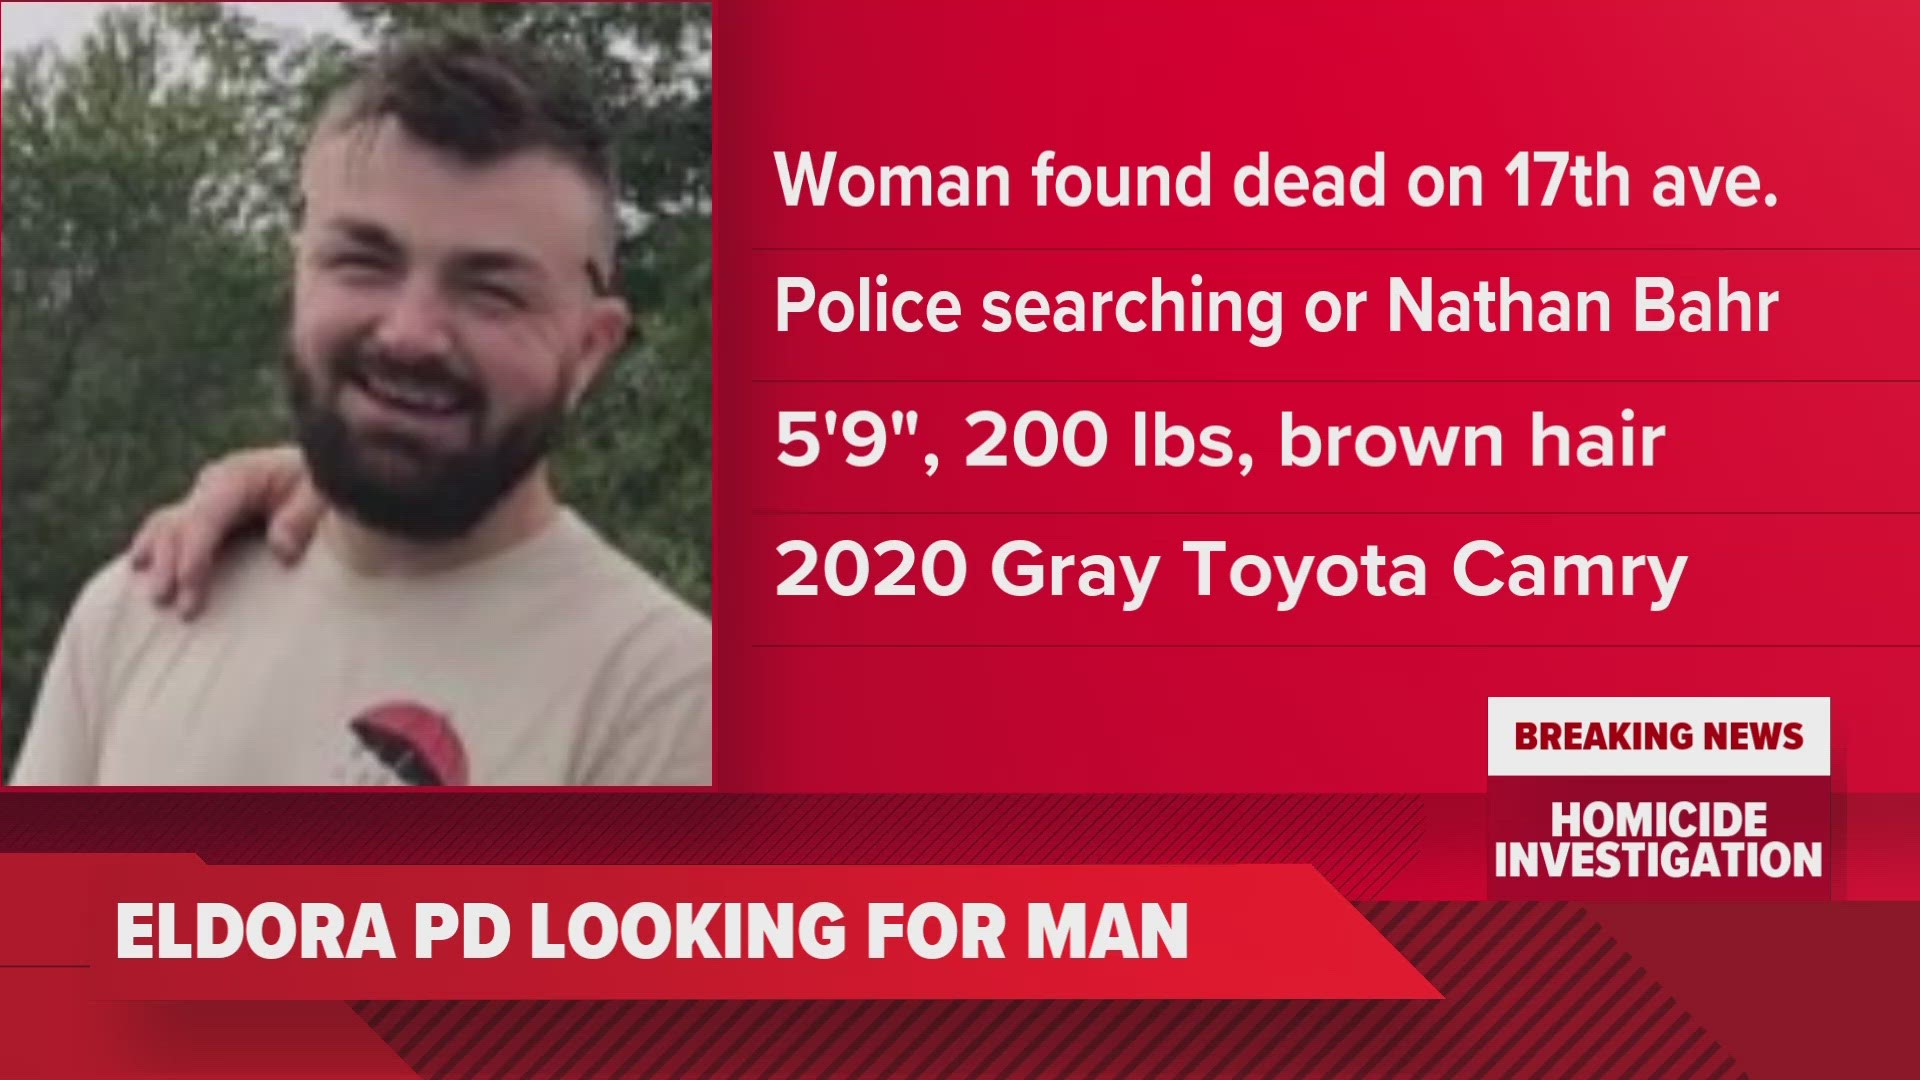 Early Friday morning, Eldora police officers found a woman dead inside a home on 17th Avenue. Now, they're looking for 28-year-old Nathan Bahr.